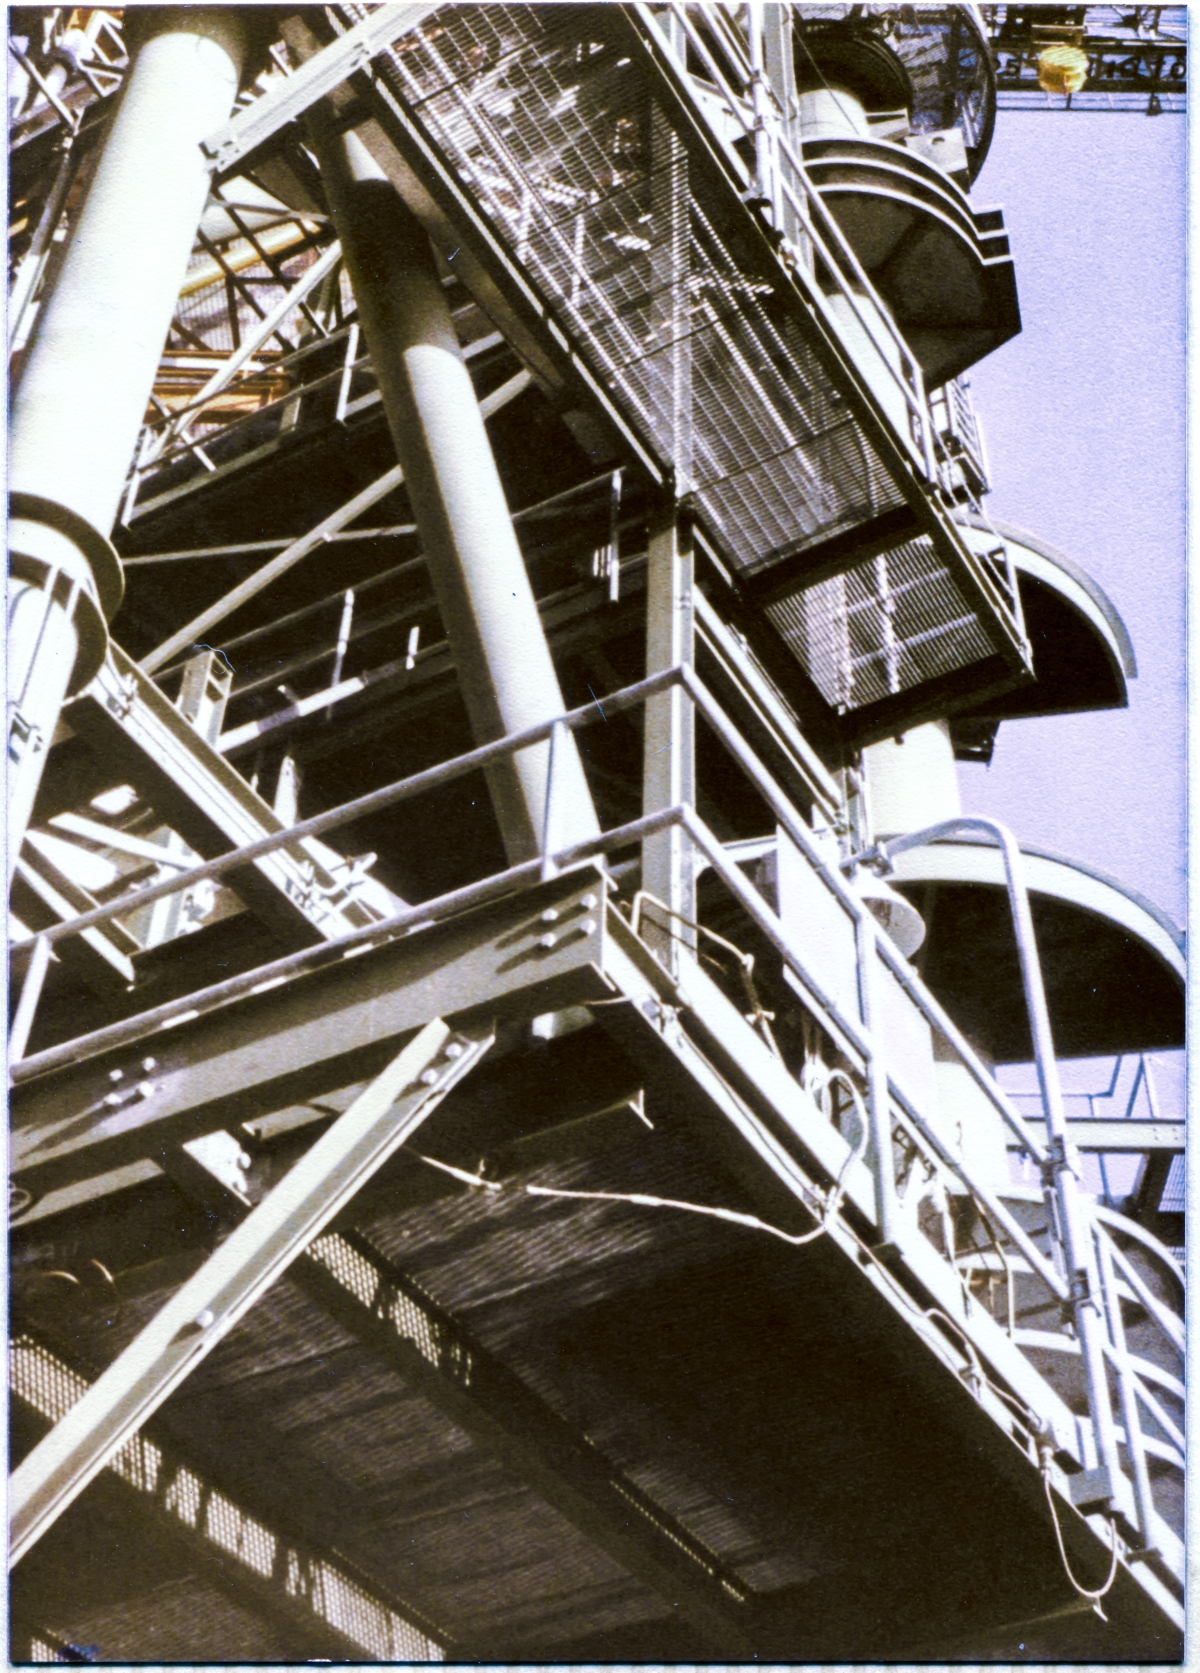 Image 023. From a viewpoint at the front corner of the left Tail Service Mast Access Platform, looking back and steeply upwards, toward the Hinge Column, the platform framing of the face of the Rotating Service Structure between Column Lines 1 and 2, at Launch Complex 39-B, Kennedy Space Center, Florida, takes on a very science-fiction aspect, with the uncanny visual appeal of a gigantic massive thing that cannot possibly be real, but very much so, is. Photo by James MacLaren.